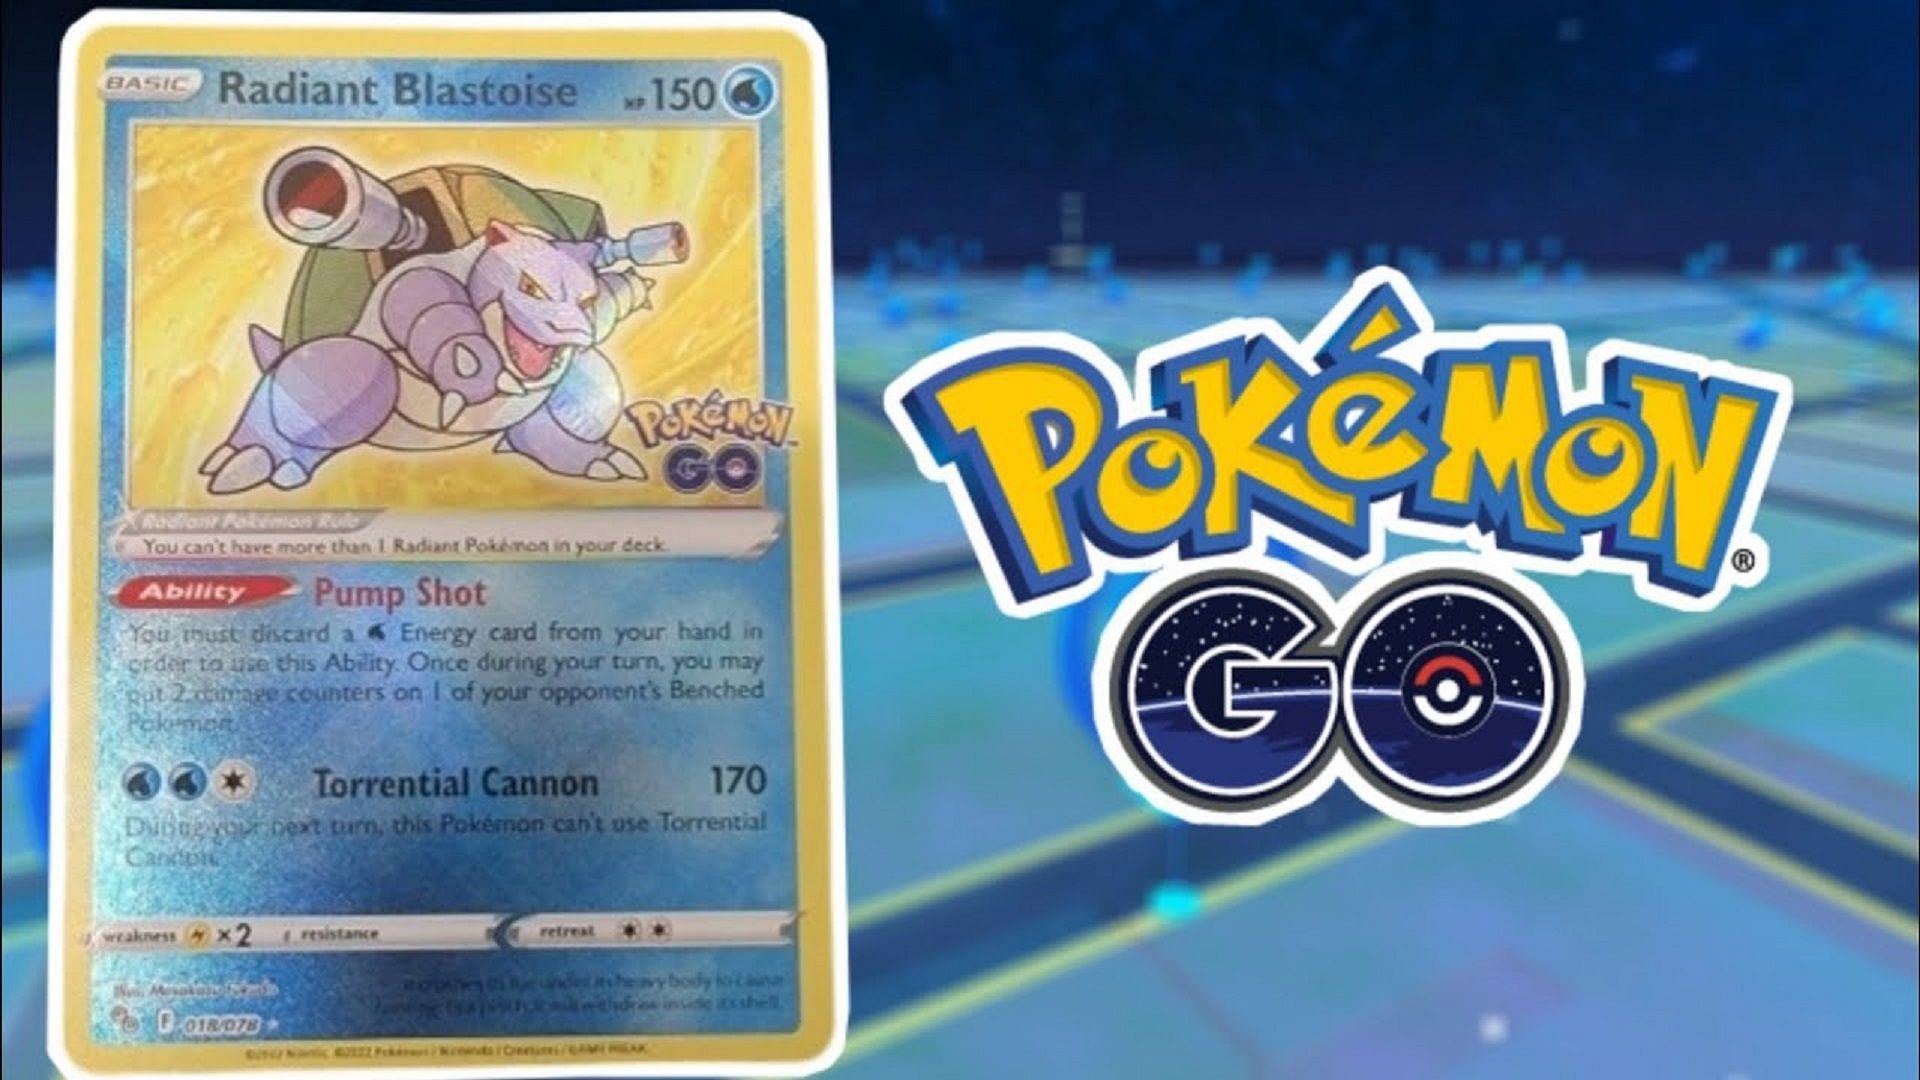 Radiant Blastoise&#039;s card art leaked quite sometime before the official announcement (Image via Absolute Speciment/Youtube)